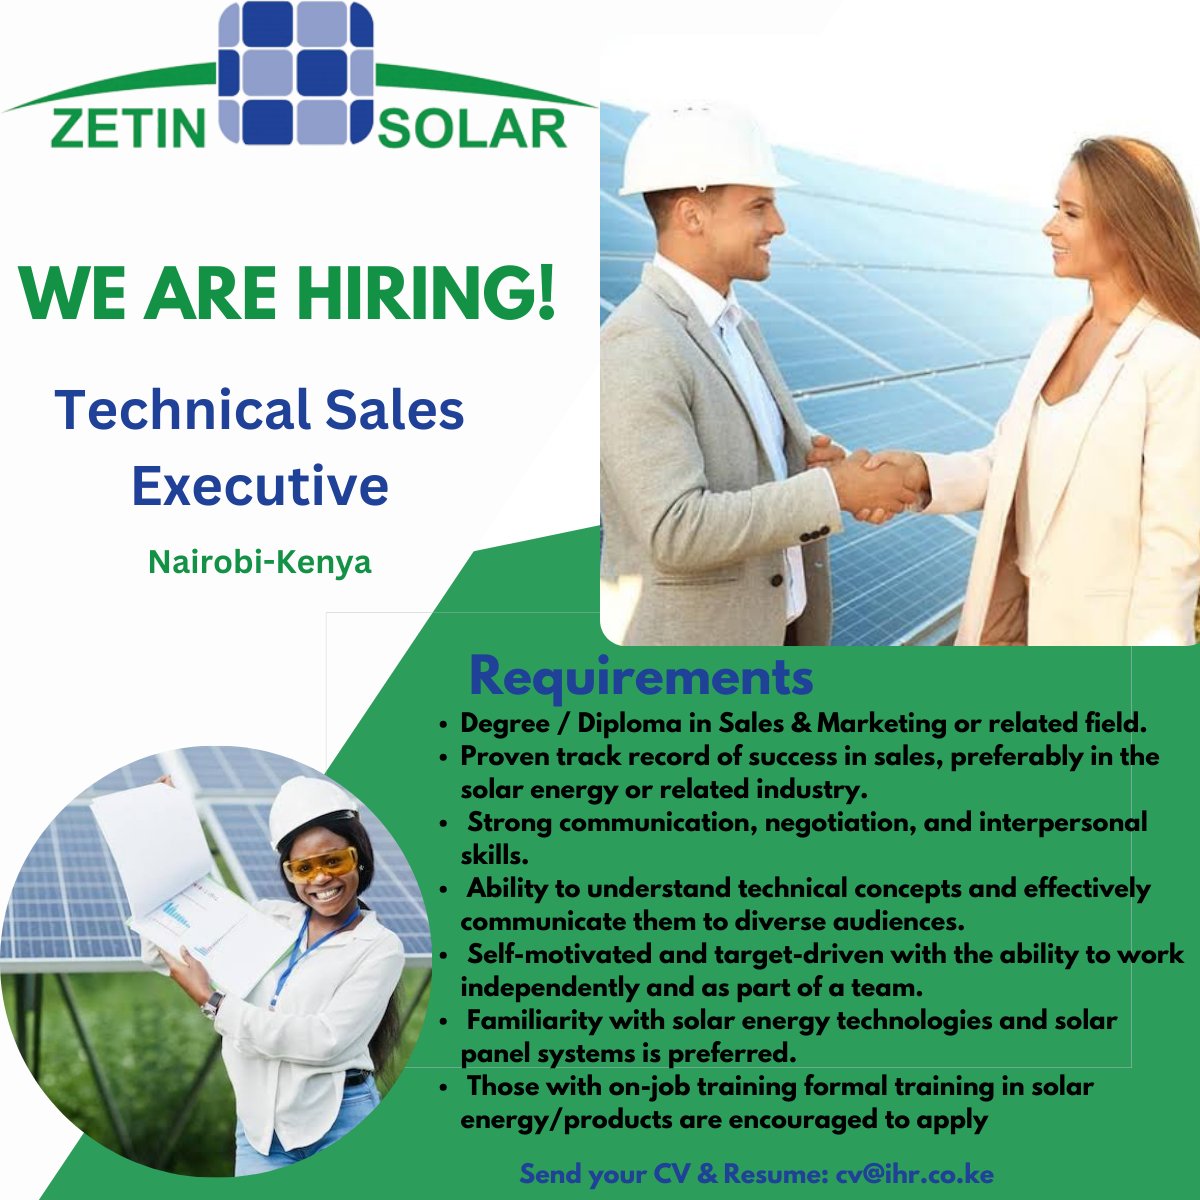 JOB VACANCY!!
We are hiring a Technical Sales Executive in our Nairobi Kenya branch.
Qualified and interested candidates to send their CVs to cv@ihr.co.ke
#hiringalert #technicalsales #solarcompany #ApplyNow